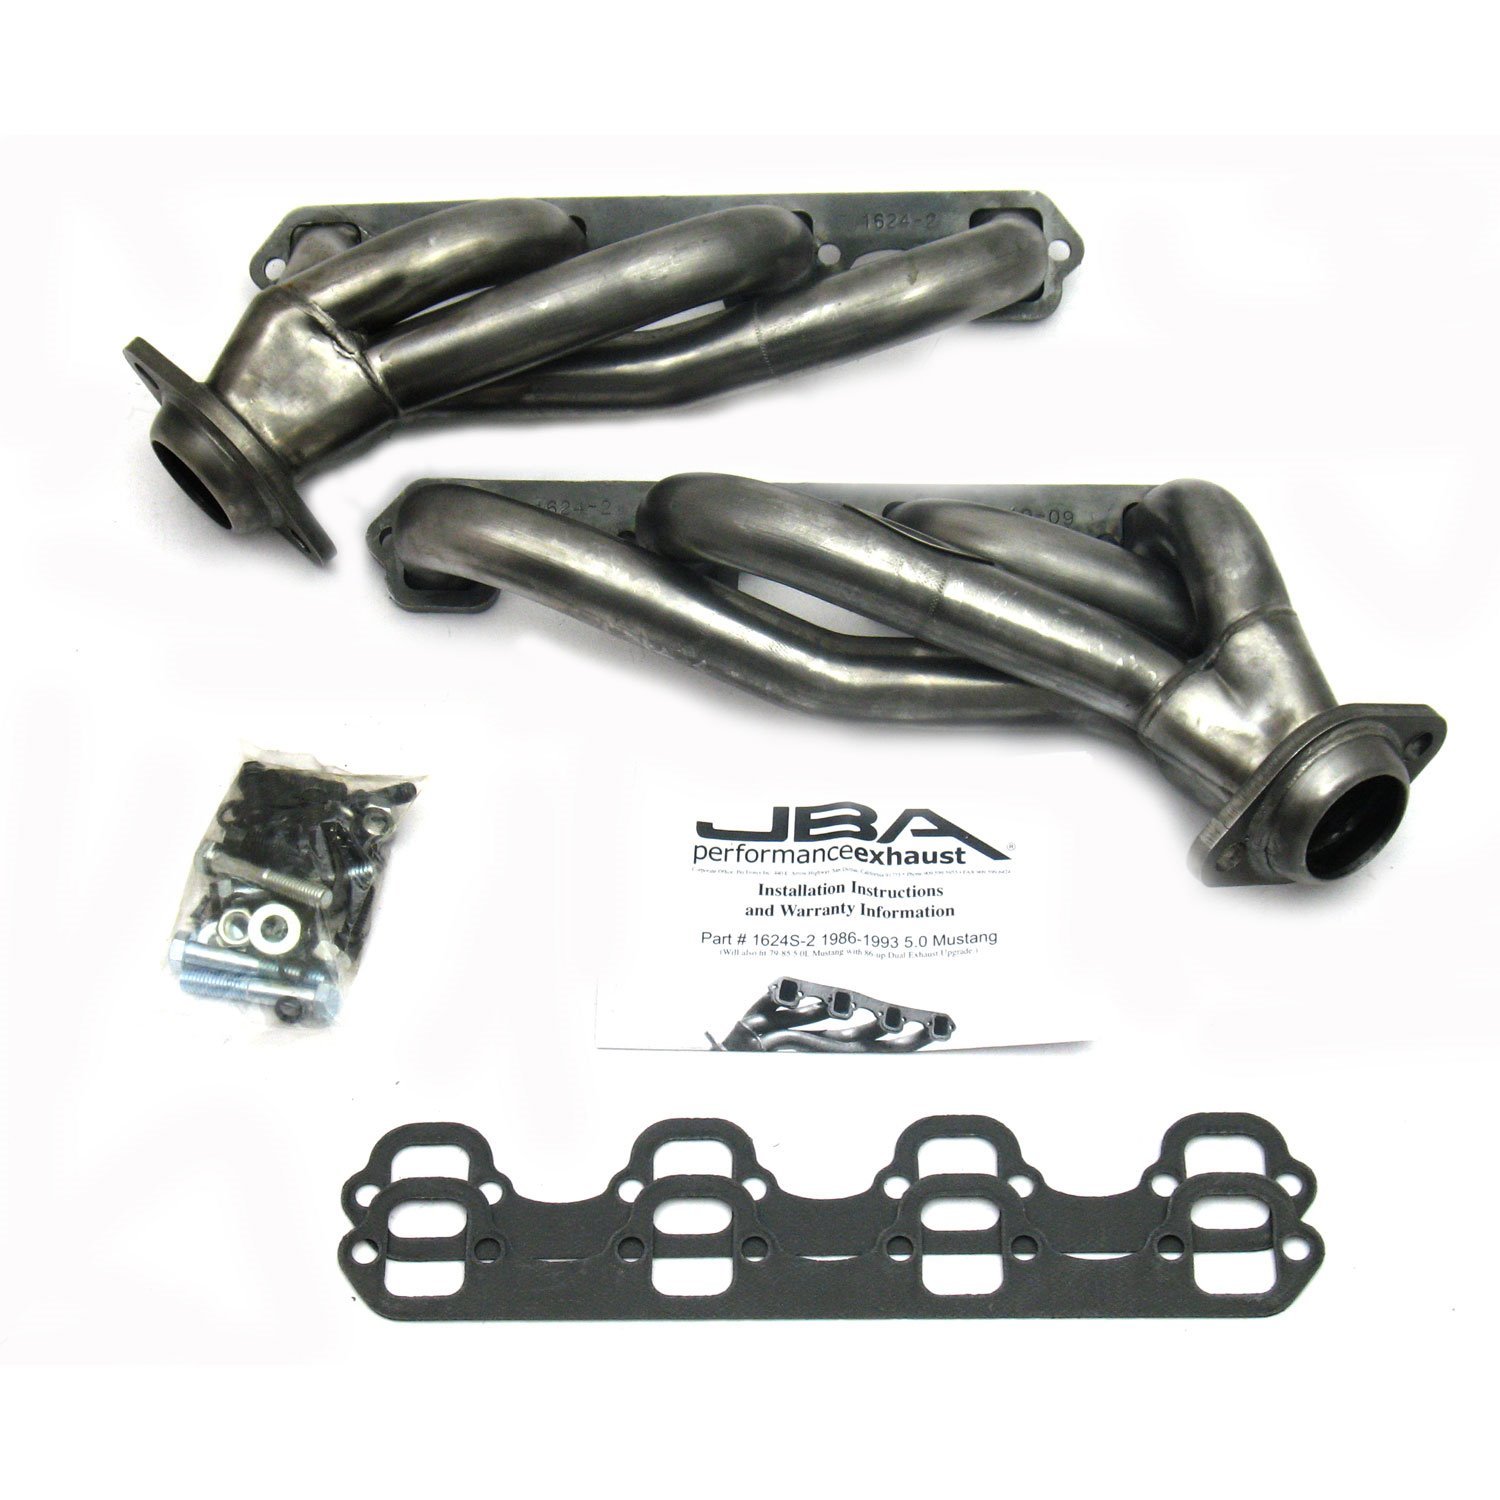 1-5/8" Shorty Headers 1986-1993 Mustang GT/LX 5.0L